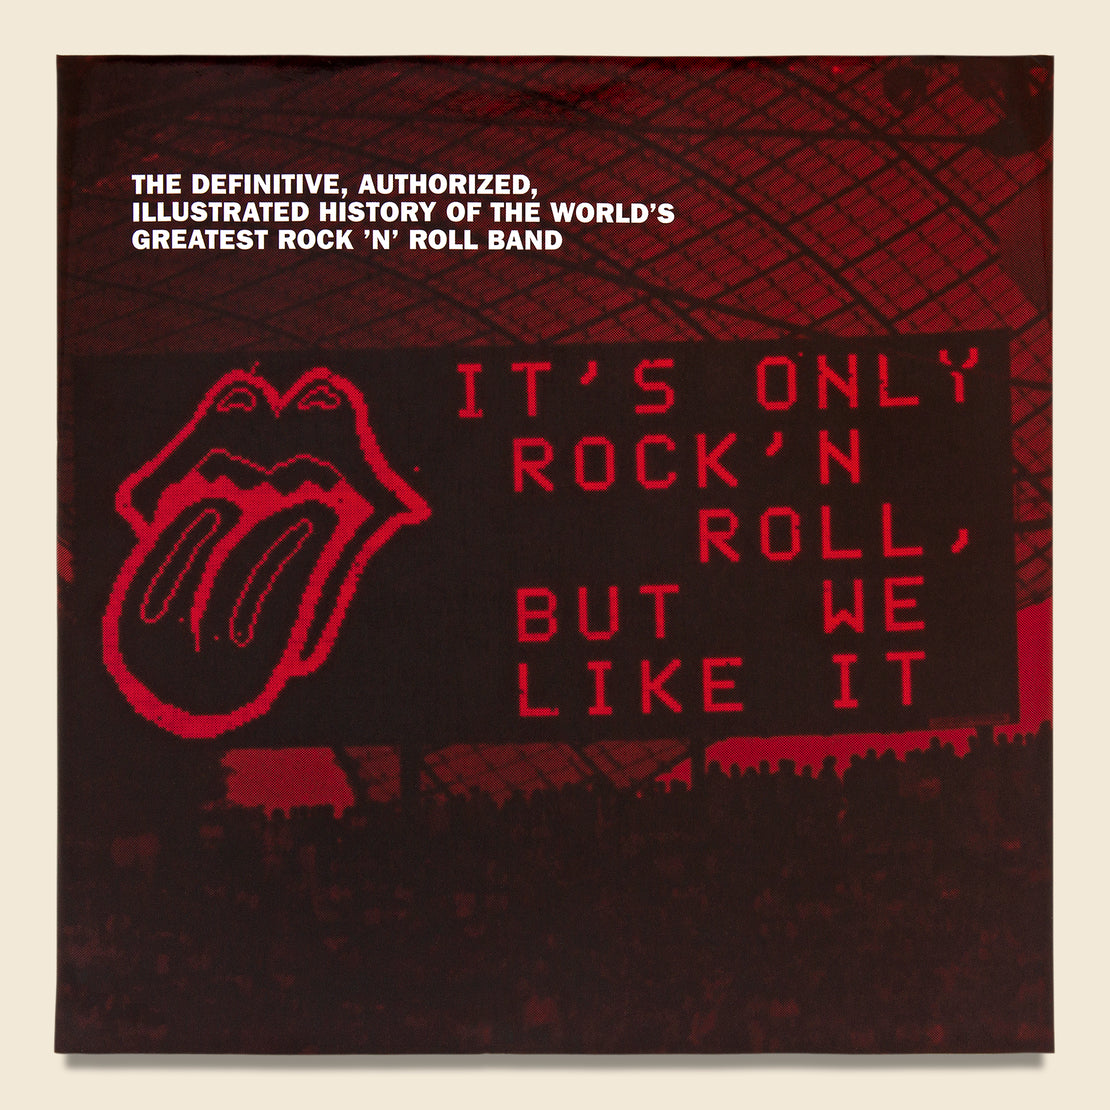 The Rolling Stones - Bookstore - STAG Provisions - Home - Library - Book